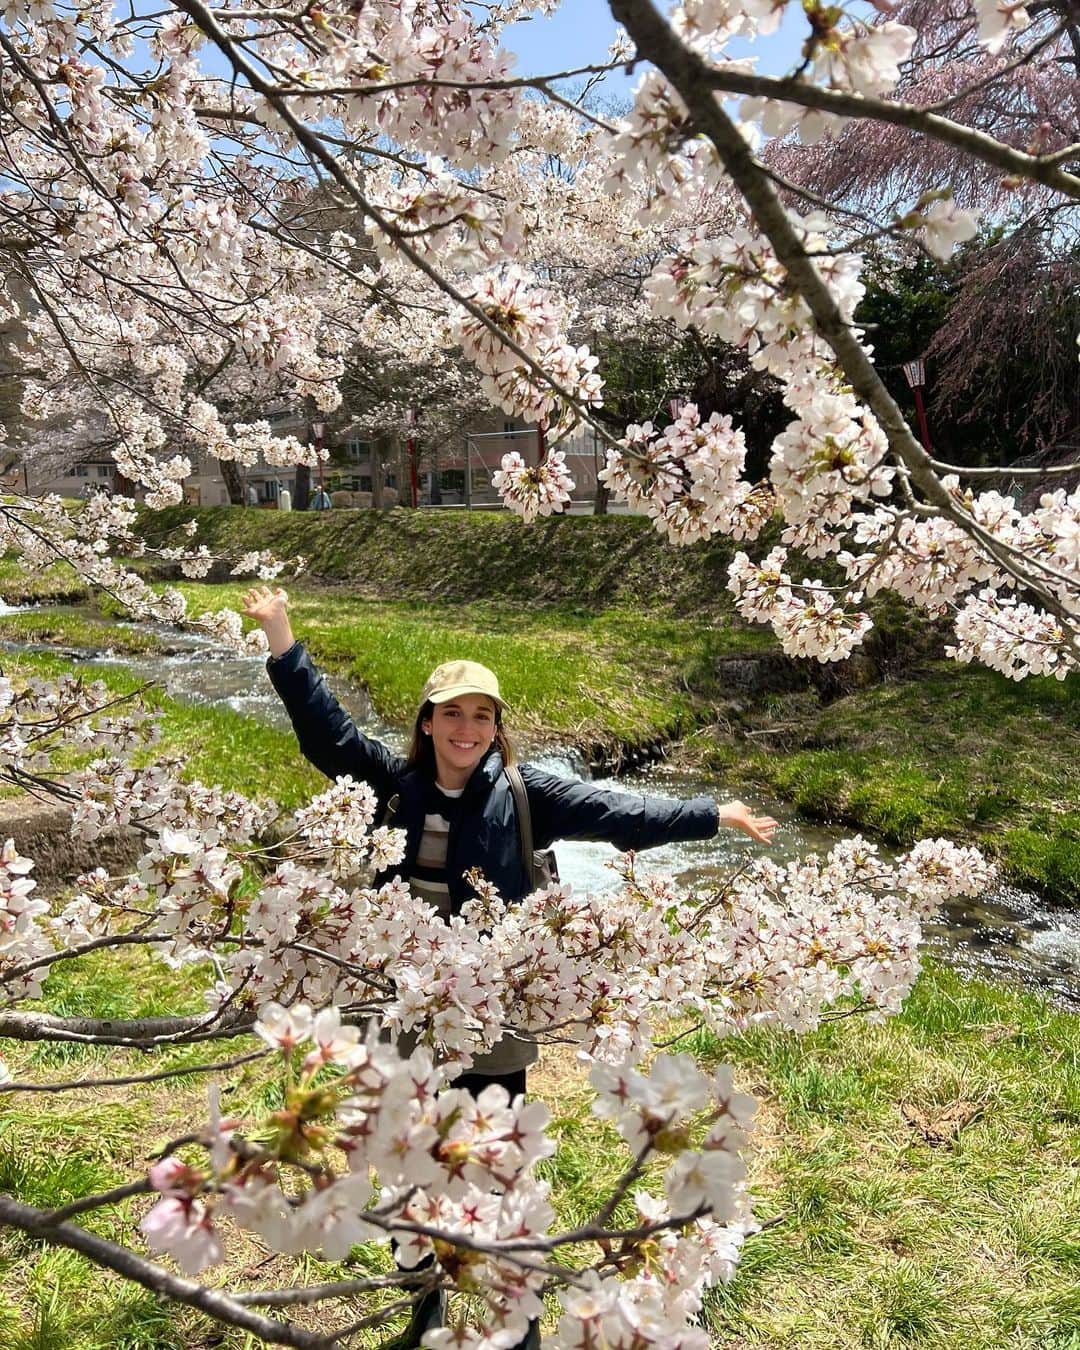 Rediscover Fukushimaのインスタグラム：「Cherry blossoms in full bloom today at Kannonji-gawa River in Inawashiro Town! 🌸  You can watch today’s livestream from Kannonji-gawa on our Facebook page - we also shared some places where you can see sakura in the coming days in Fukushima! 🤩🙌  We’ll be doing another livestream from Inawashiro soon, so stay tuned! 👀   And thank you so much for your support! 💗  #visitfukushima #fukushima #fukushimaprefecture #inawashiro #beautifuljapan #beautiful #visitjapan #japantravel #japantrip #japantravelinspo #sakura #spring #japanspring #sakurajapan #sakuraseason #cherryblossomseason #kannonjigawa #kannonjigawasakura #japanreels #visittohoku #tohokutrip #jrpasstohoku #桜 #東北旅行 #福島観光 #観音寺川の桜」